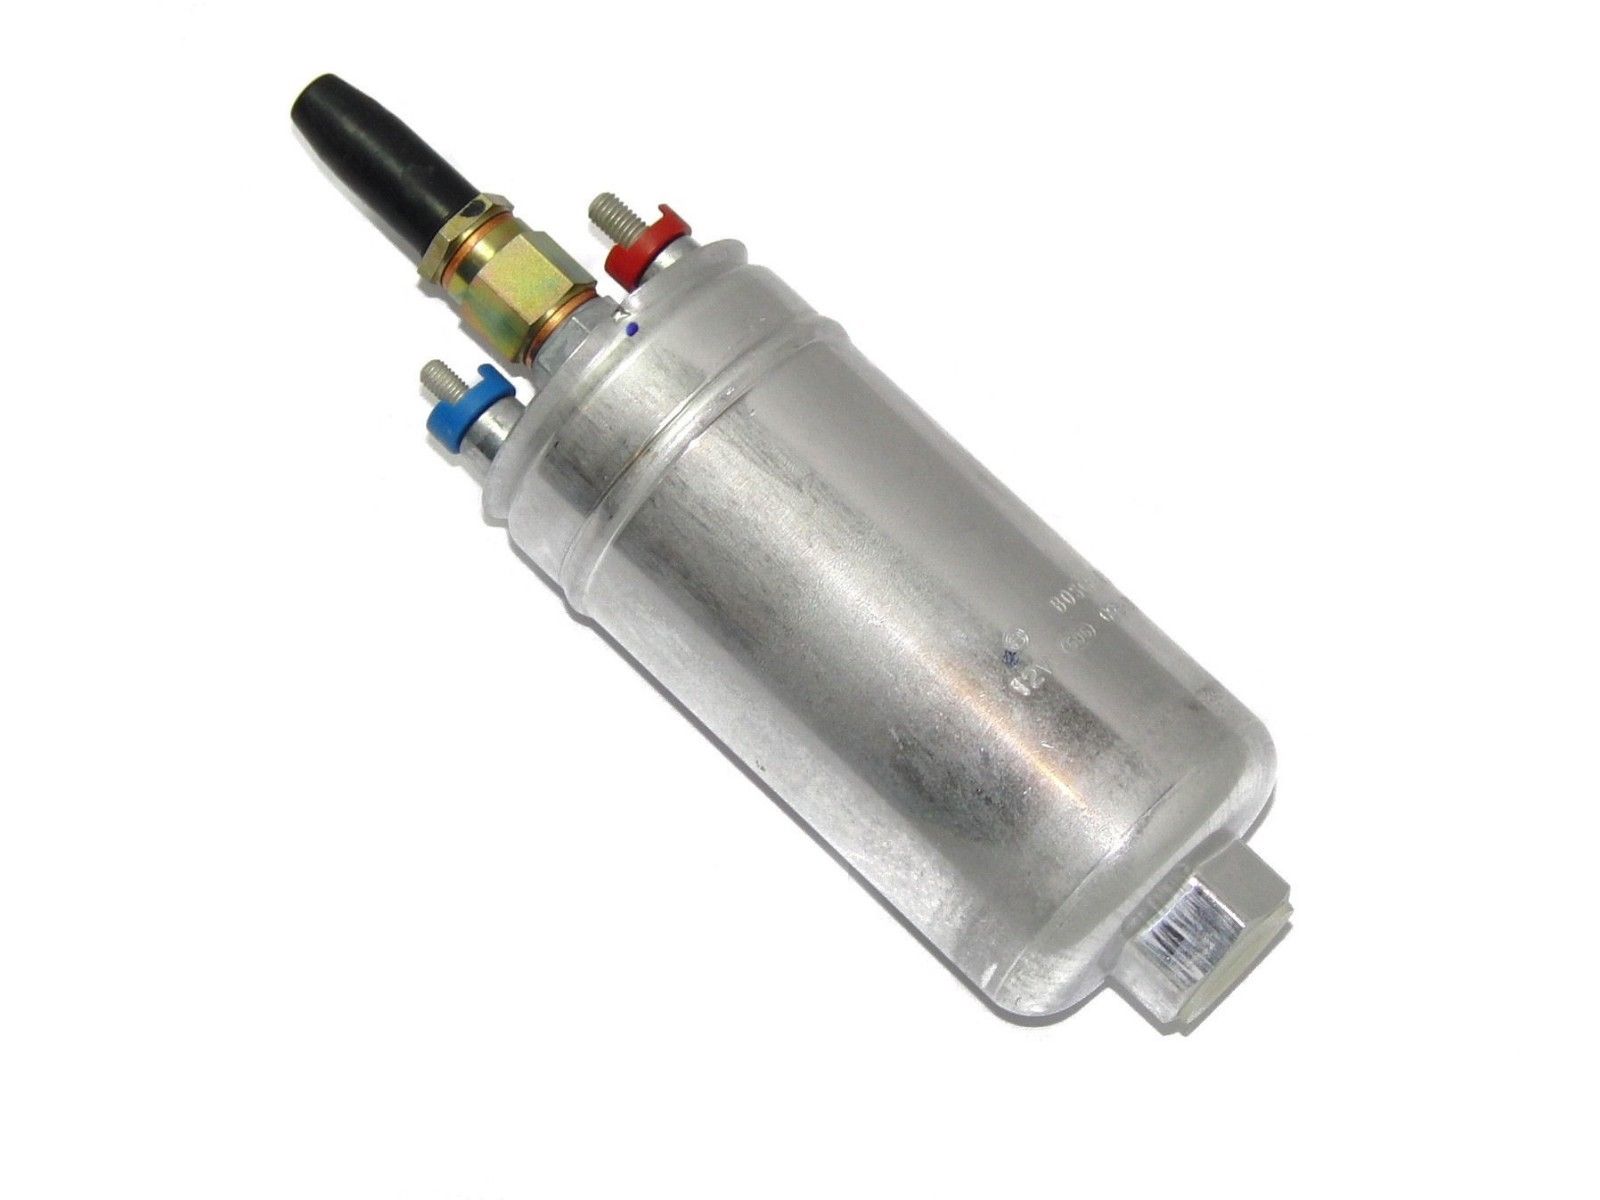 bmw and fuel pump removal tools - Buy bmw and fuel pump removal tools at  Best Price in Malaysia